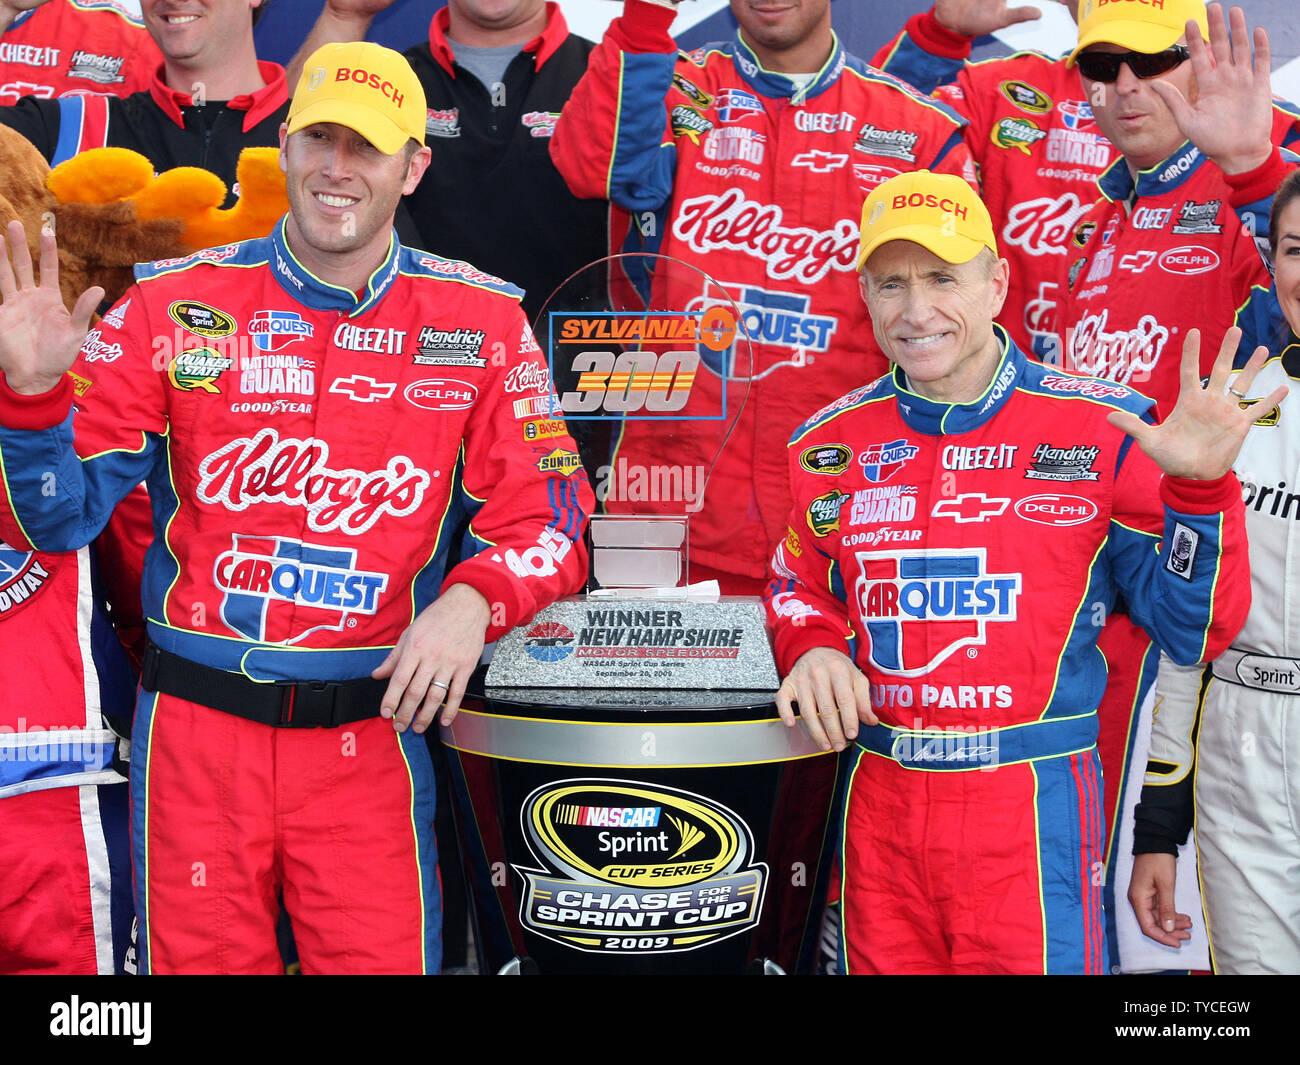 Mark Martin and team celebrate winning the NASCAR Sprint Cup series Sylvania 300 at New Hampshire Motor Speedway in Loudon, New Hampshire, September 20, 2009.  UPI/Malcolm Hope Stock Photo